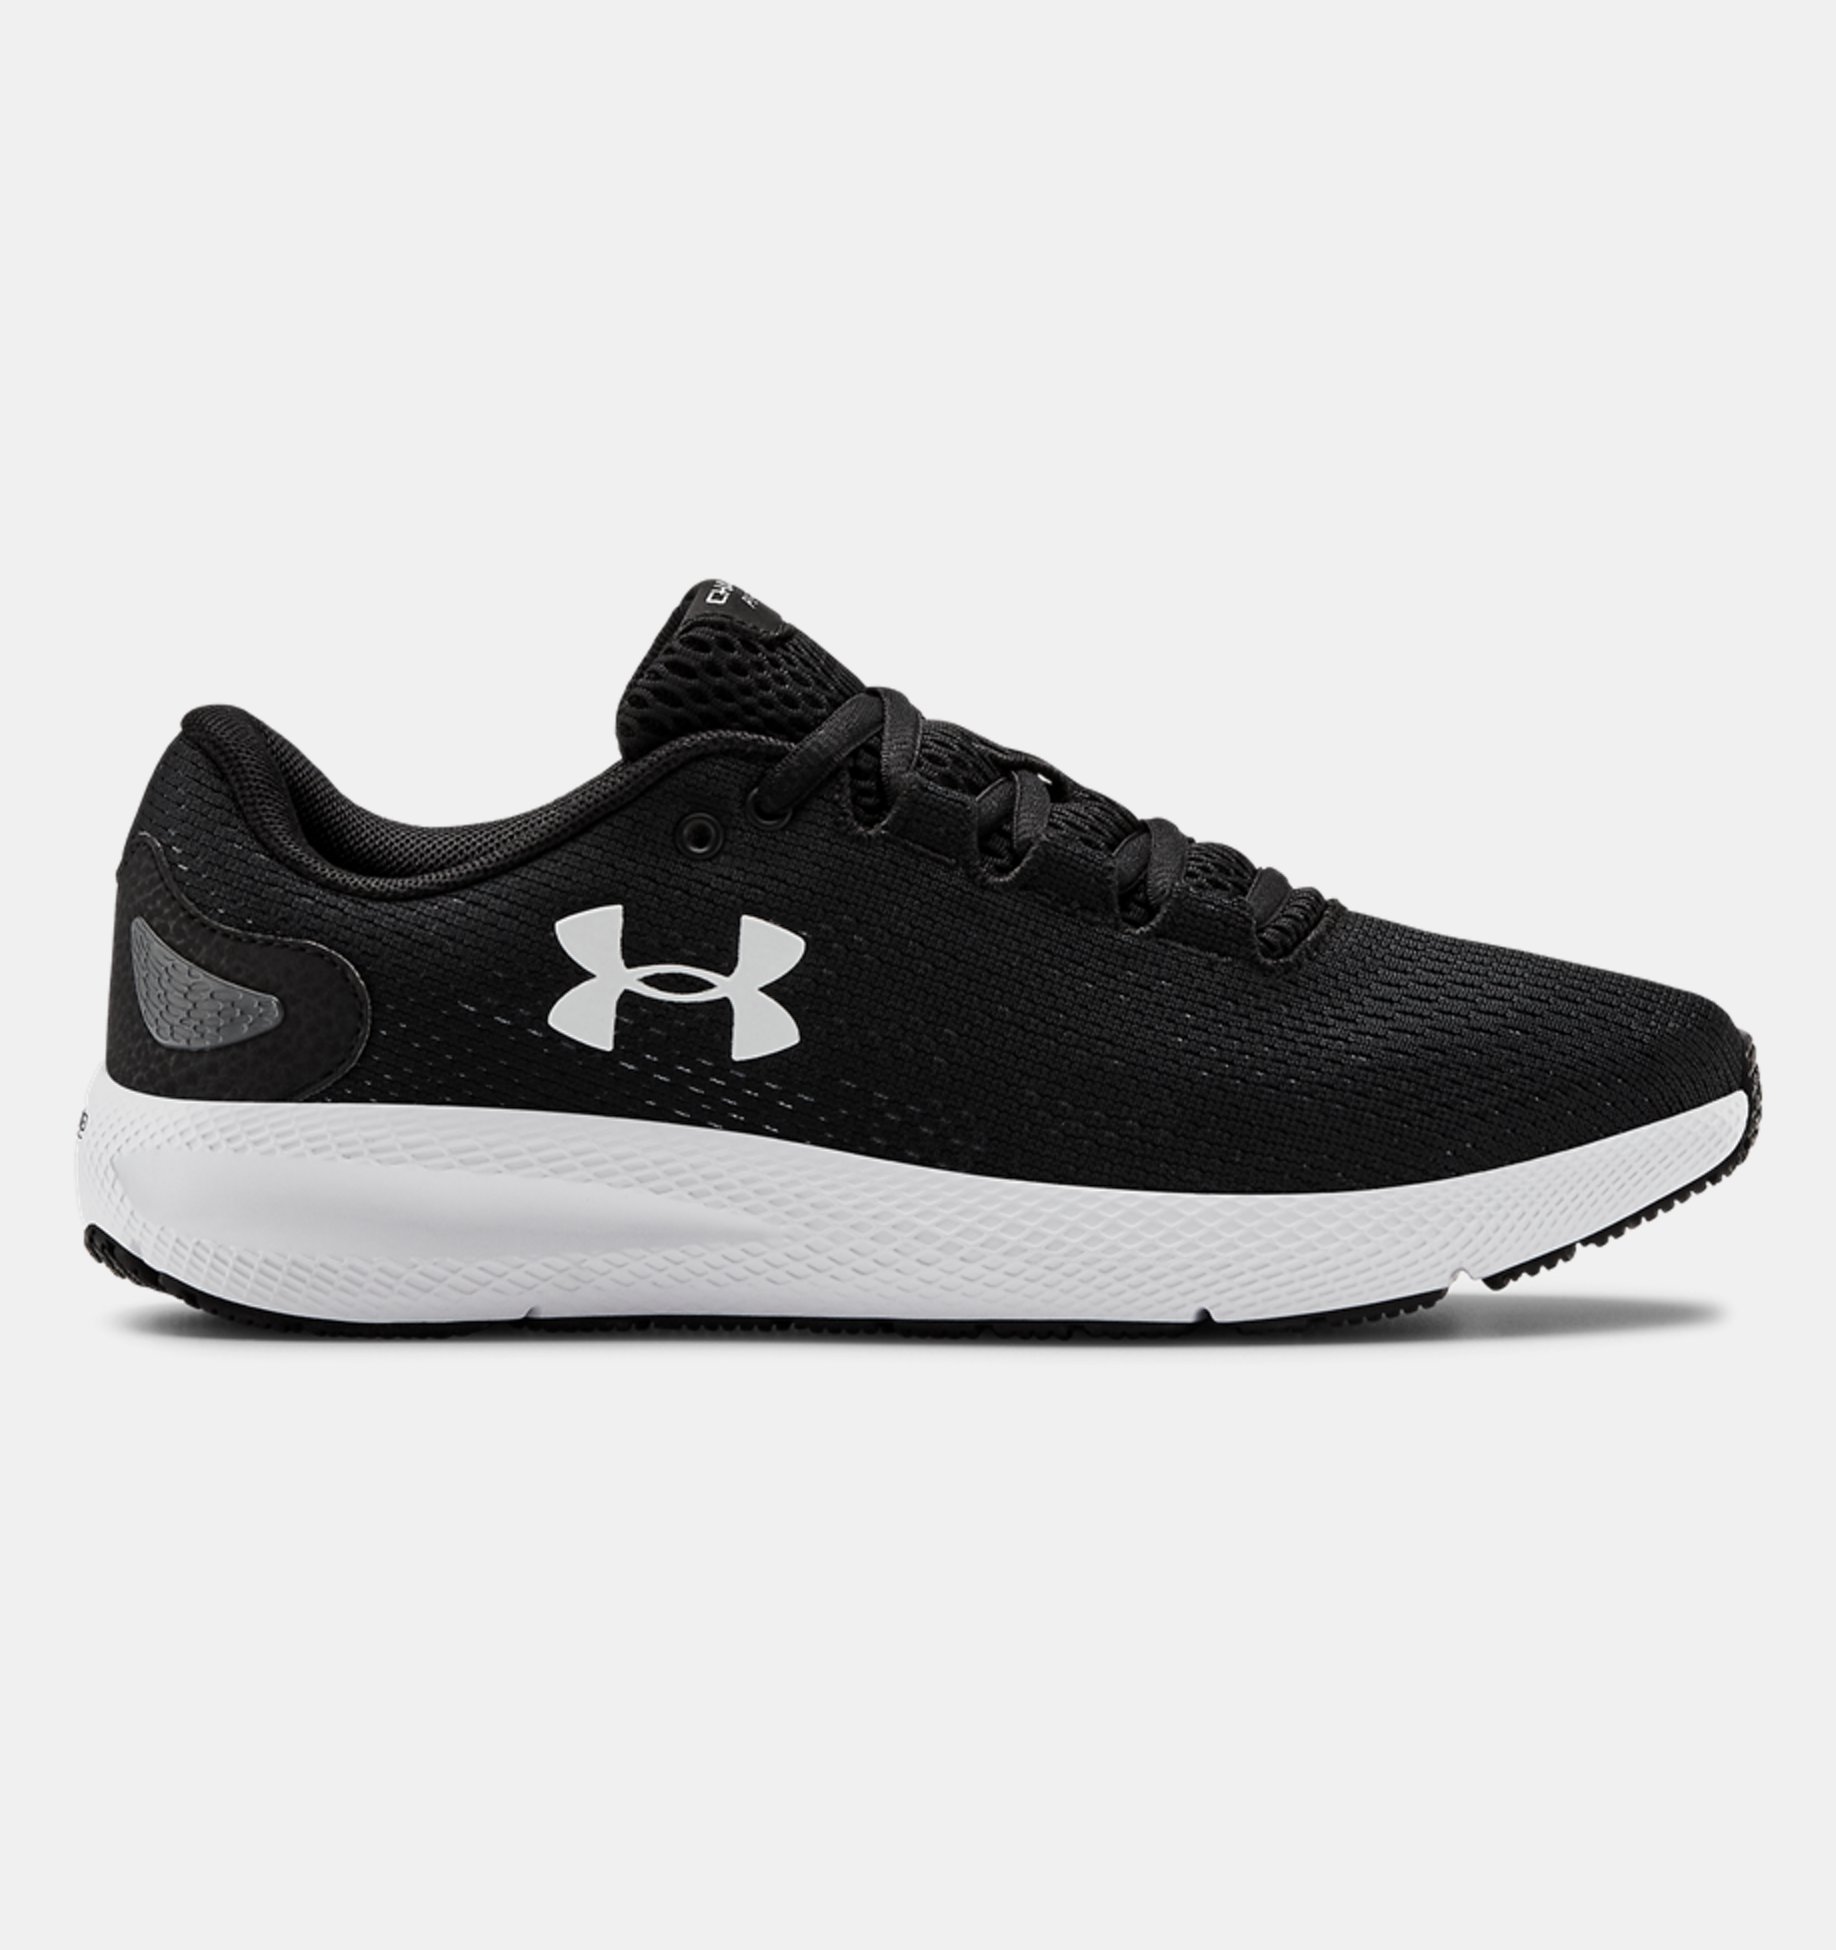 Under Armour Women W Charged Pursuit 2 Running Shoe